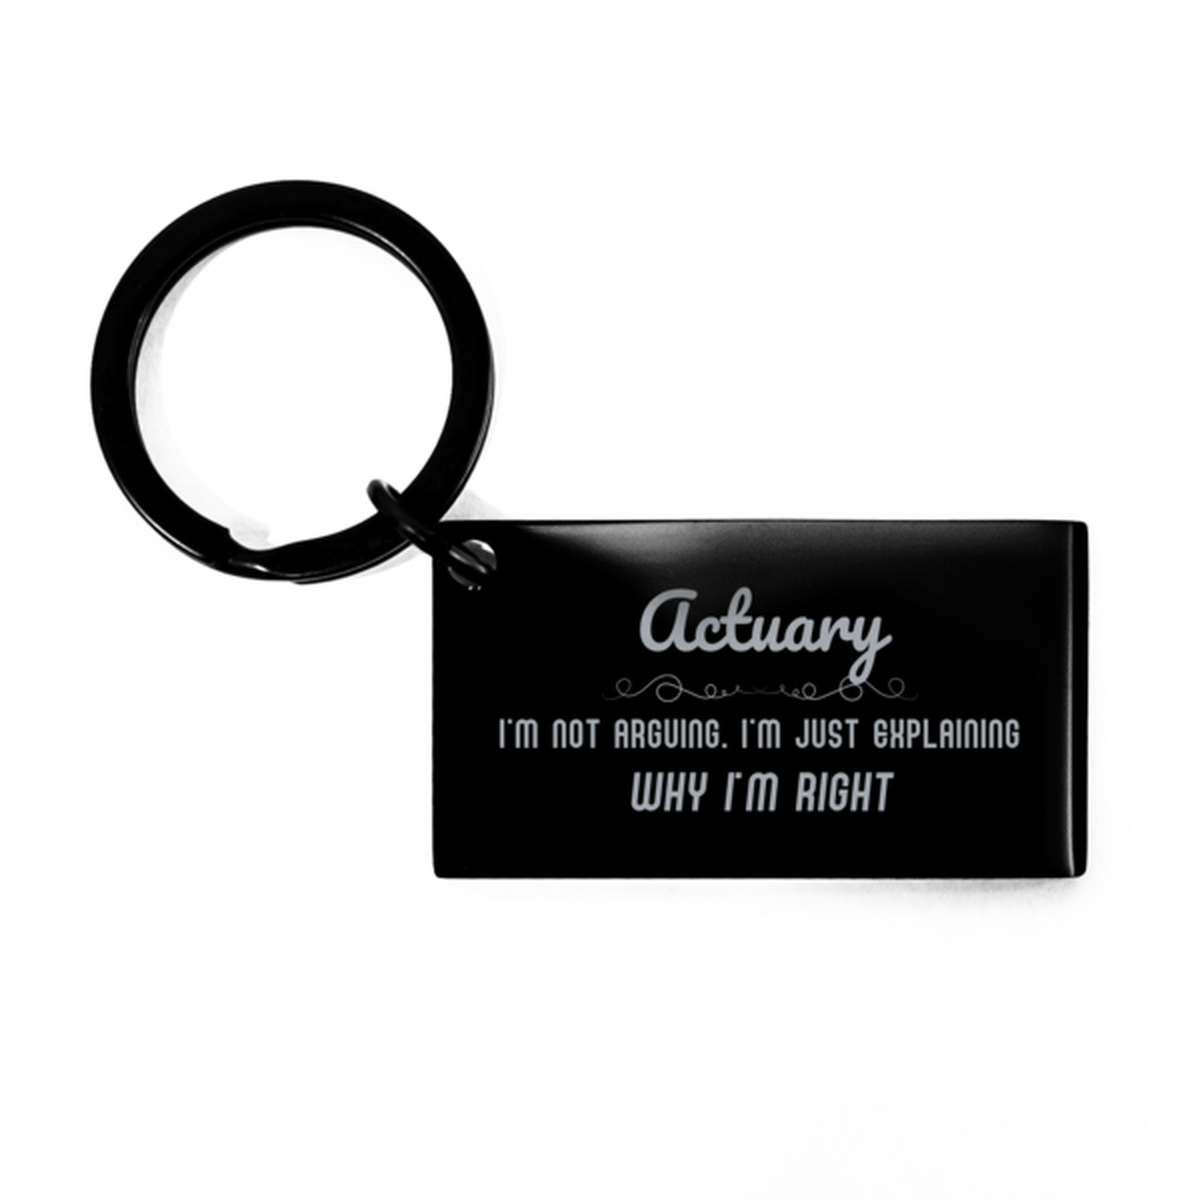 Actuary I'm not Arguing. I'm Just Explaining Why I'm RIGHT Keychain, Funny Saying Quote Actuary Gifts For Actuary Graduation Birthday Christmas Gifts for Men Women Coworker